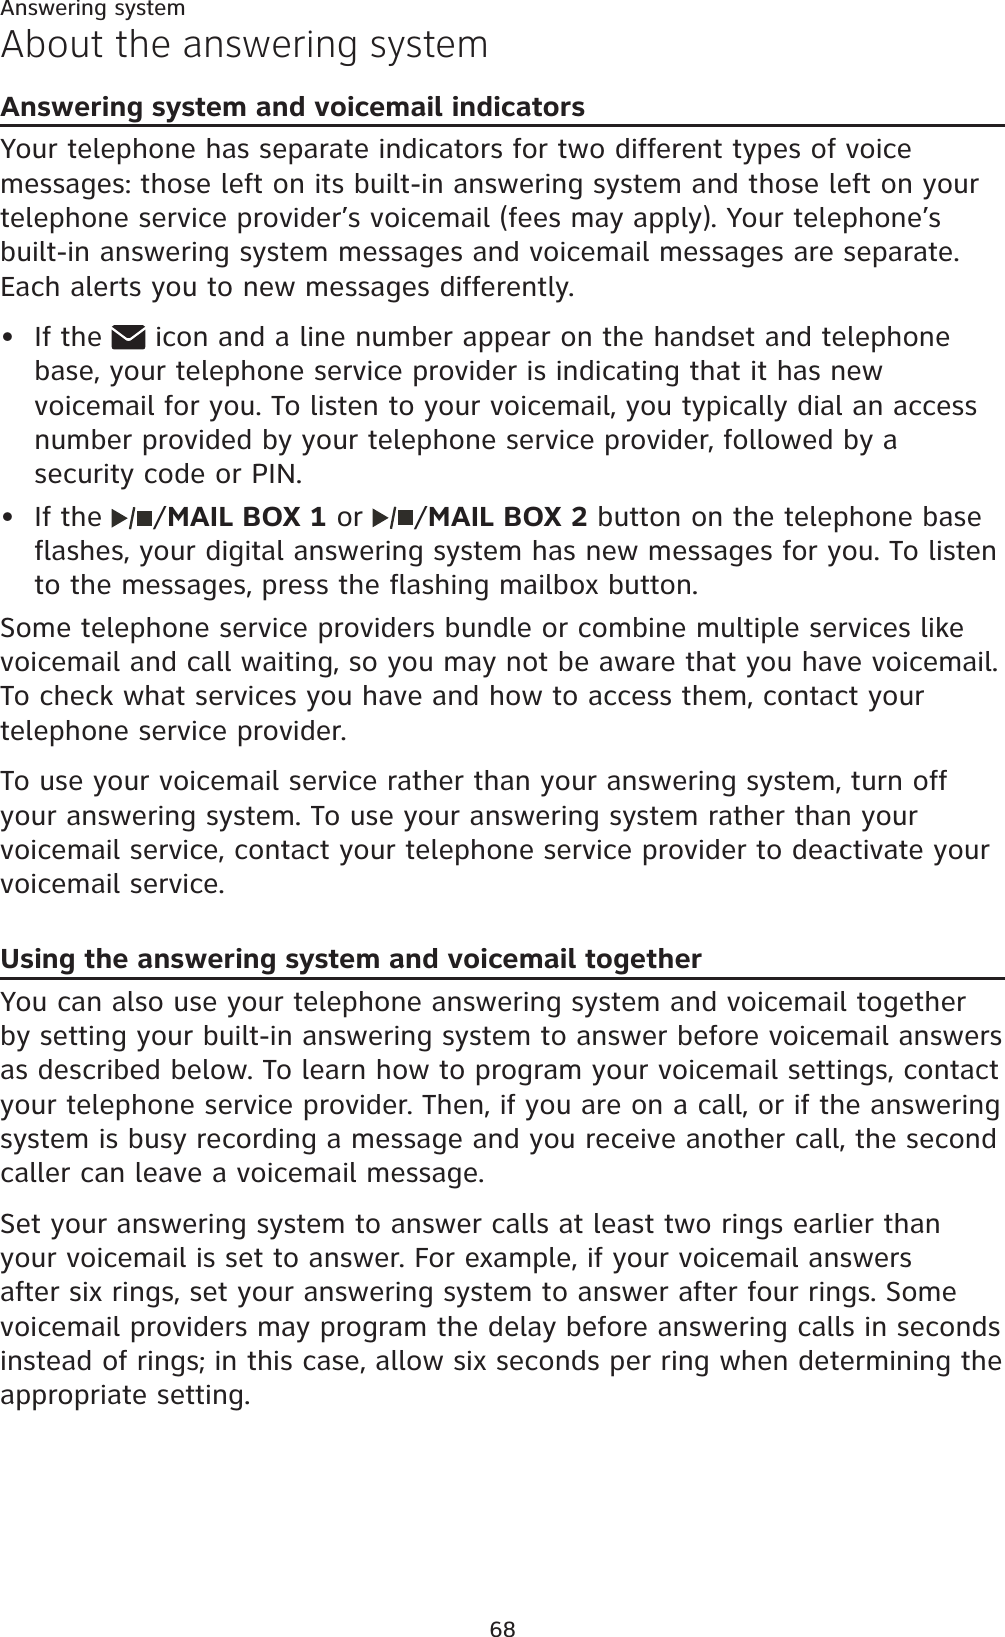 68Answering systemAbout the answering systemAnswering system and voicemail indicatorsYour telephone has separate indicators for two different types of voice messages: those left on its built-in answering system and those left on your telephone service provider’s voicemail (fees may apply). Your telephone’s built-in answering system messages and voicemail messages are separate. Each alerts you to new messages differently.If the   icon and a line number appear on the handset and telephone base, your telephone service provider is indicating that it has new voicemail for you. To listen to your voicemail, you typically dial an access number provided by your telephone service provider, followed by a security code or PIN.If the  /MAIL BOX 1 or  /MAIL BOX 2 button on the telephone base flashes, your digital answering system has new messages for you. To listen to the messages, press the flashing mailbox button. Some telephone service providers bundle or combine multiple services like voicemail and call waiting, so you may not be aware that you have voicemail. To check what services you have and how to access them, contact your telephone service provider.To use your voicemail service rather than your answering system, turn off your answering system. To use your answering system rather than your voicemail service, contact your telephone service provider to deactivate your voicemail service. Using the answering system and voicemail togetherYou can also use your telephone answering system and voicemail together by setting your built-in answering system to answer before voicemail answers as described below. To learn how to program your voicemail settings, contact your telephone service provider. Then, if you are on a call, or if the answering system is busy recording a message and you receive another call, the second caller can leave a voicemail message.Set your answering system to answer calls at least two rings earlier than your voicemail is set to answer. For example, if your voicemail answers after six rings, set your answering system to answer after four rings. Some voicemail providers may program the delay before answering calls in seconds instead of rings; in this case, allow six seconds per ring when determining the appropriate setting.••